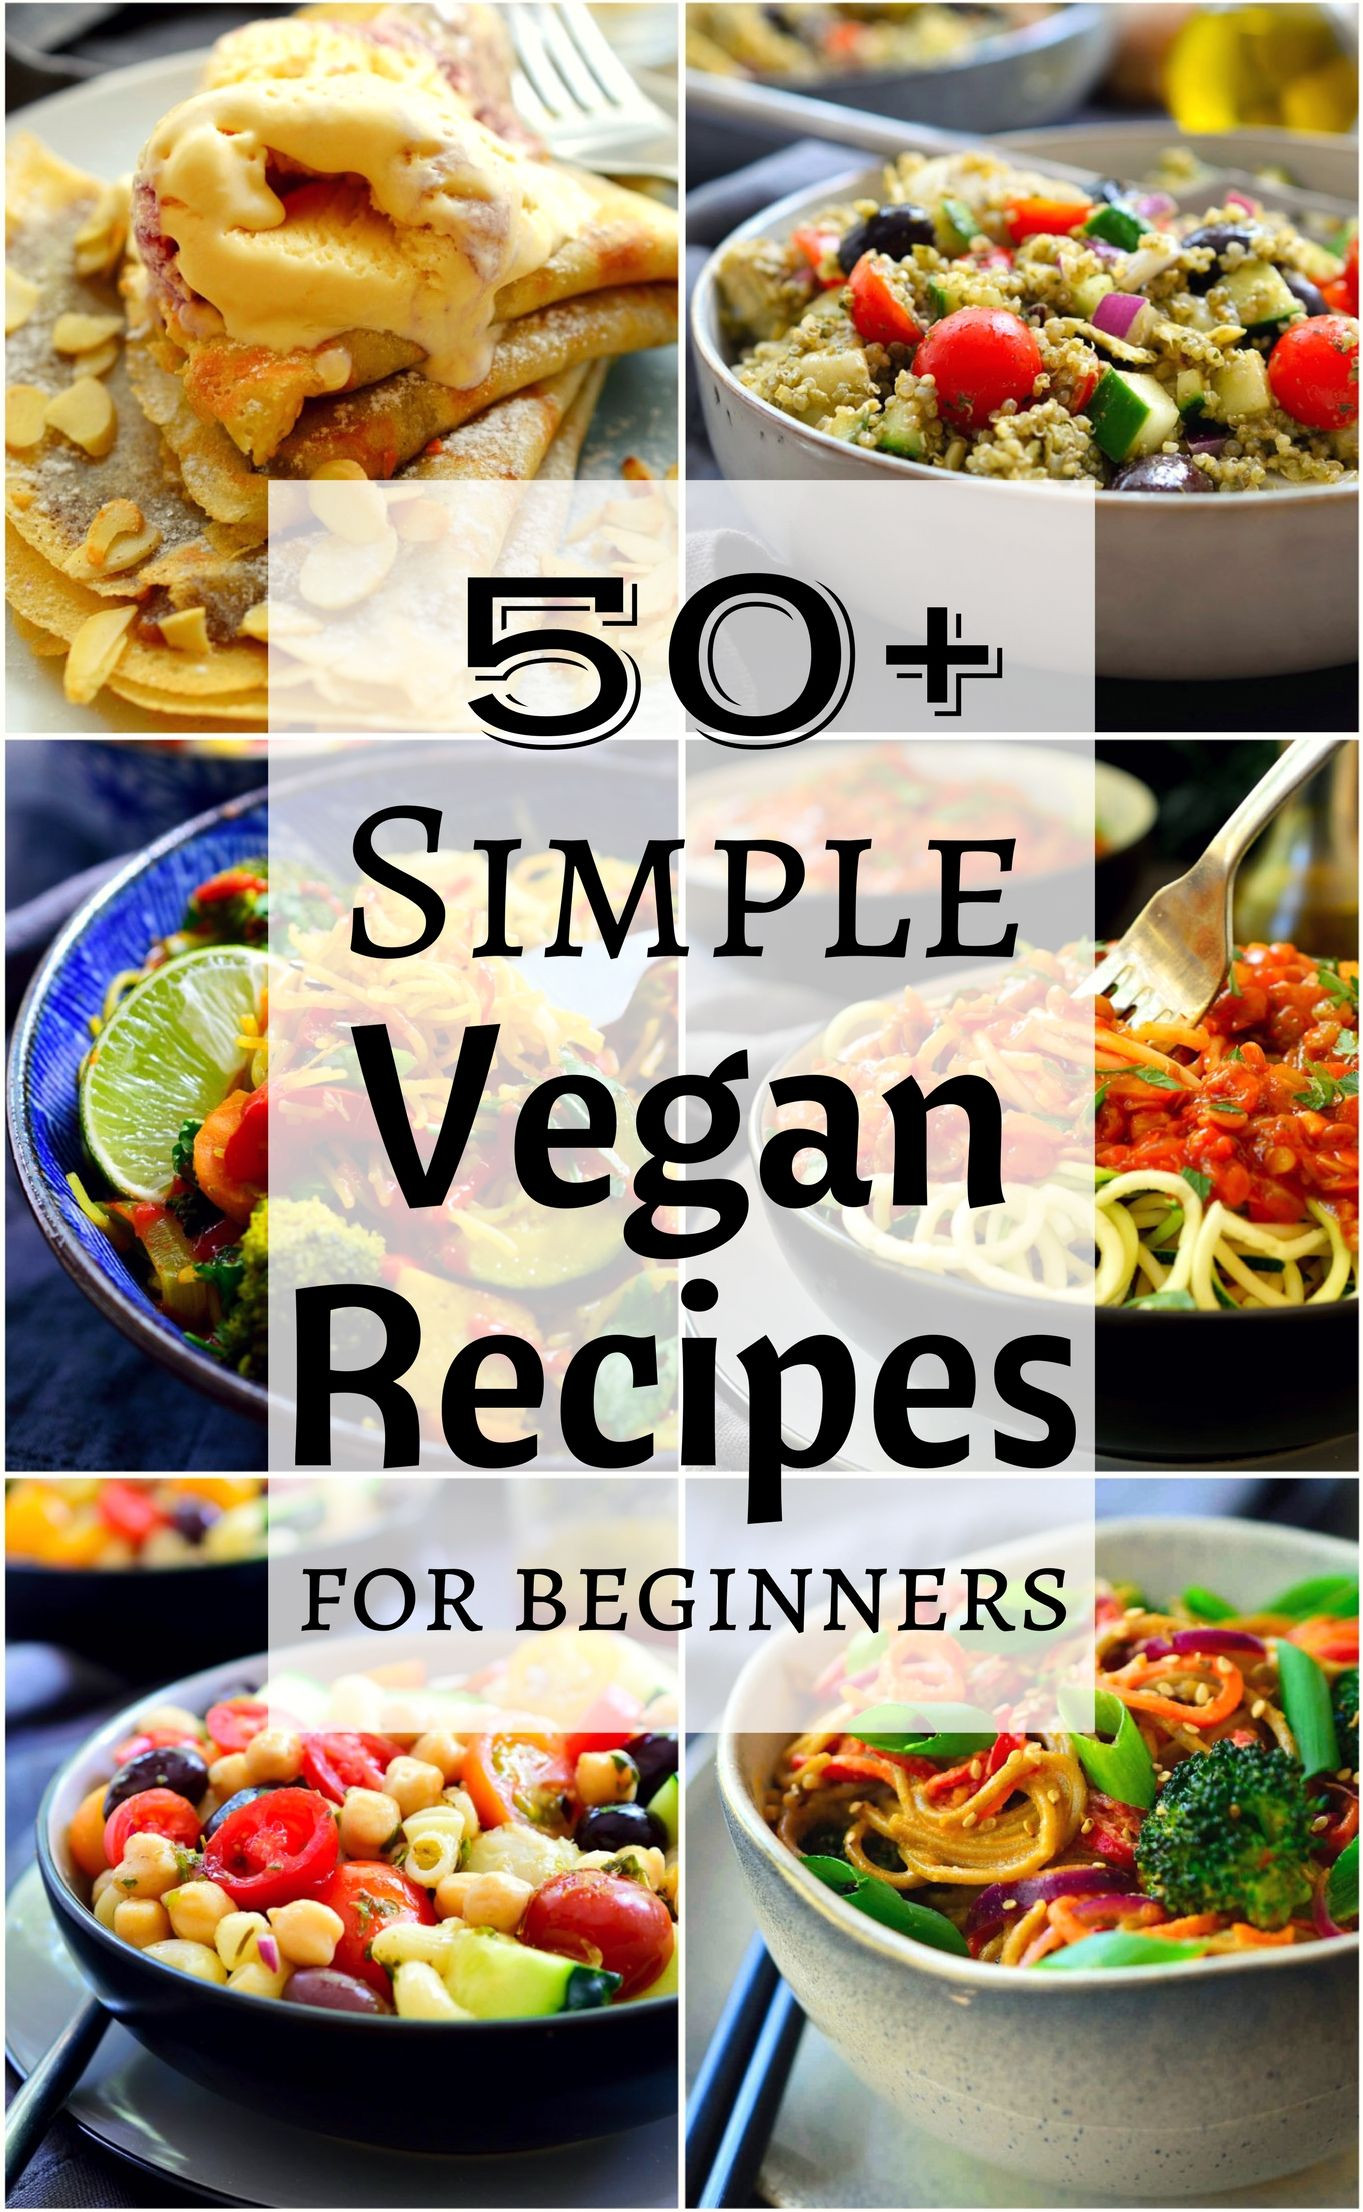 Easy Vegan Recipes For Beginners Healthy
 We’ve scoured the web to find 50 of the best simple vegan